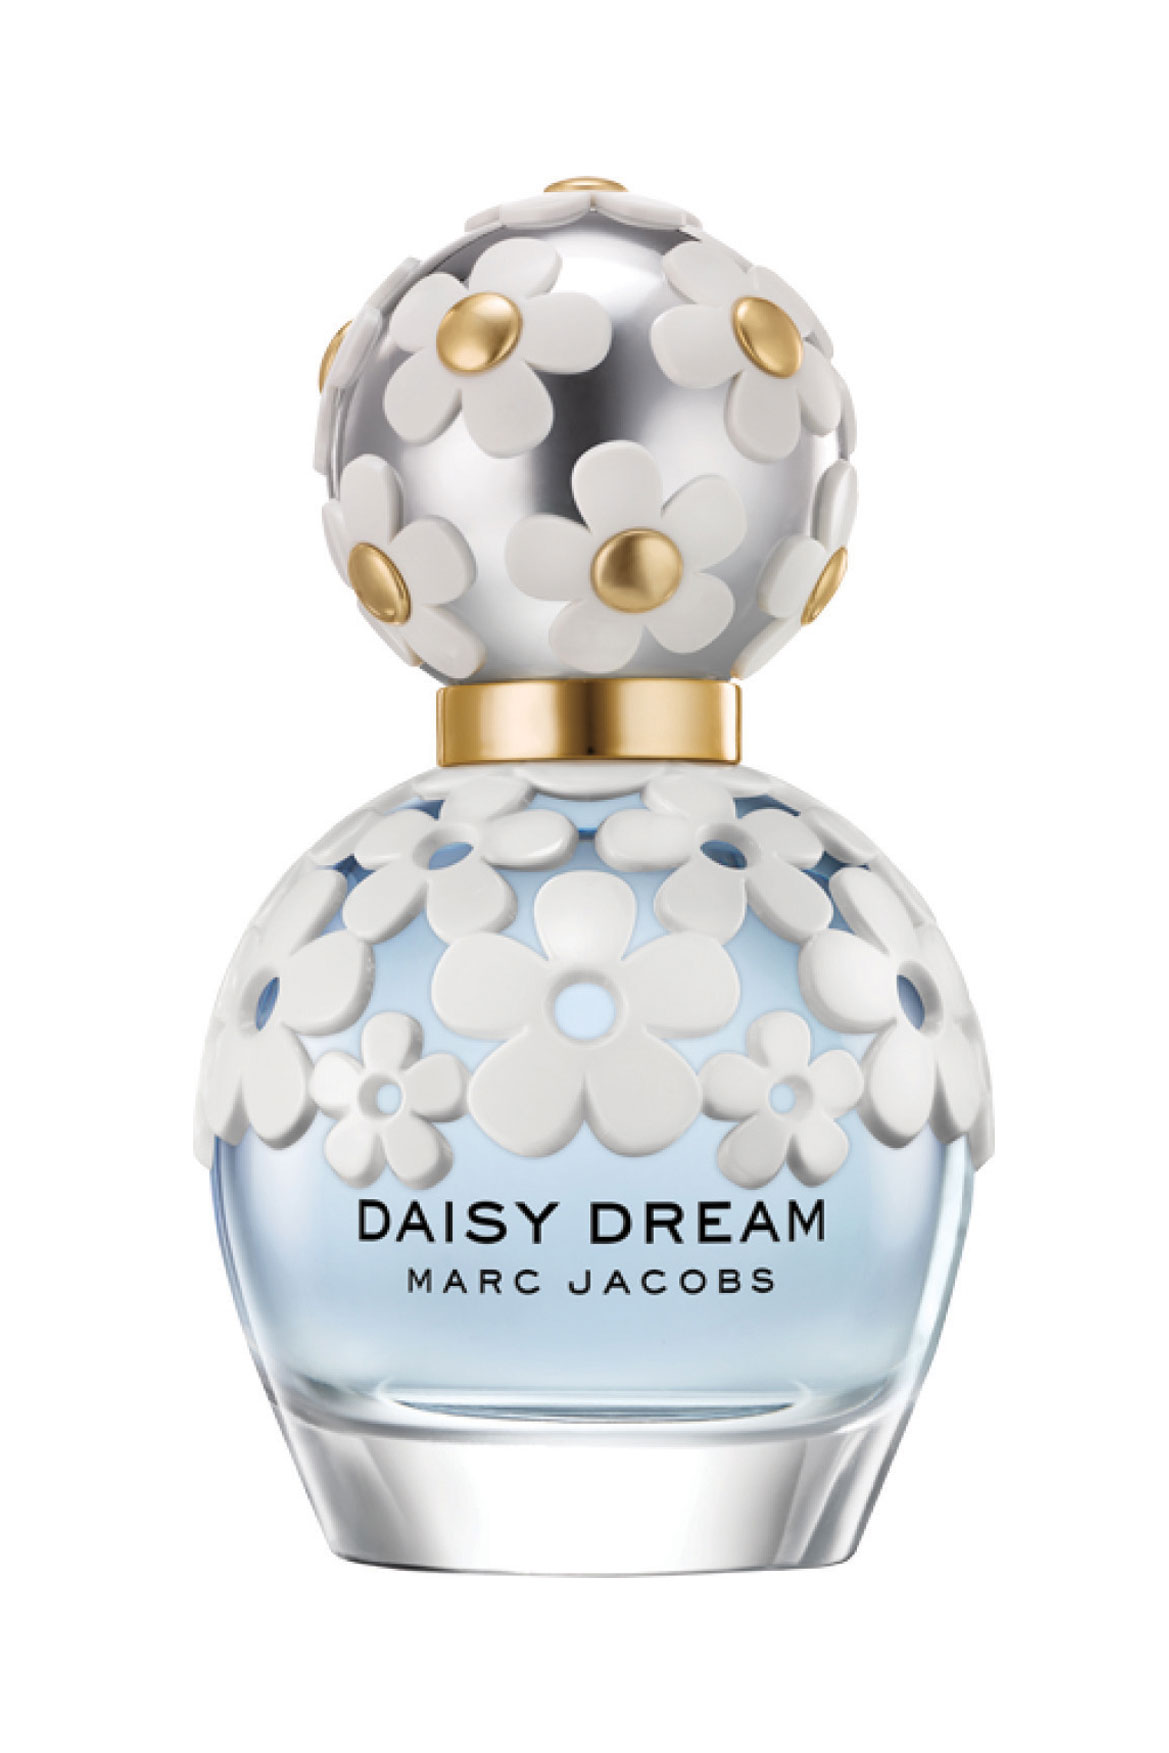 Marc Jacobs Daisy Dream – win a 50ml eau de parfum worth £52 in our competition – now closed ...